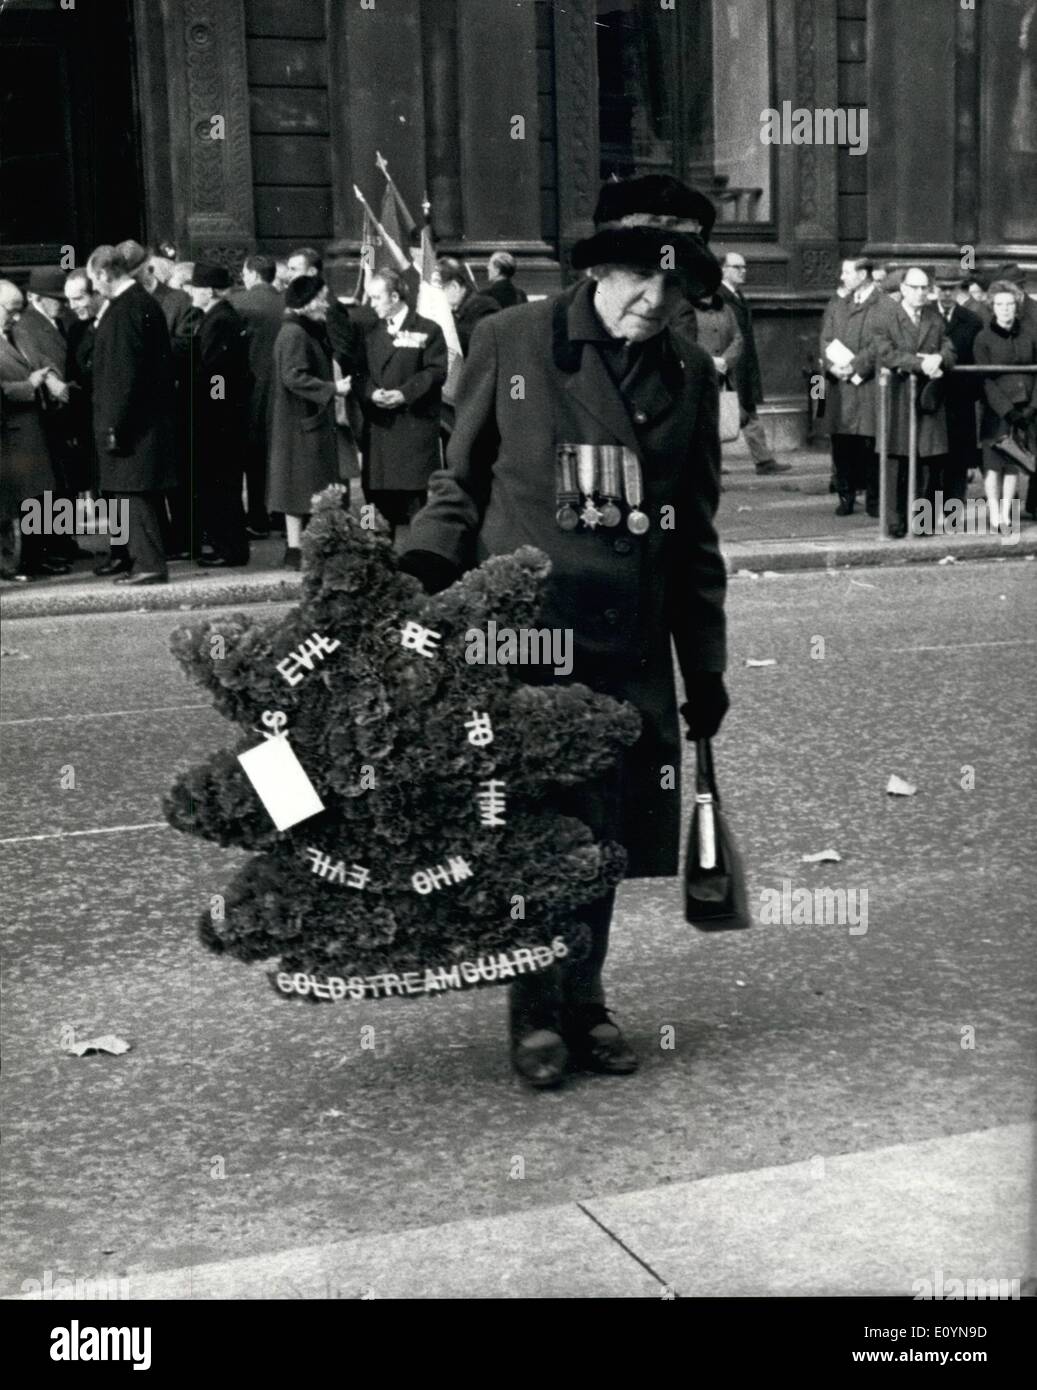 Nov. 11, 1970 - Cenotaph wreath in loving memory of Fred.: At 11 o'clock today, Fred Kemp, who went to glory on a Belgian battlefield 55 years ago, had his usual wreath laid on the Cenotaph by his window, Louisia, now in her 84th year, '' is the 11th hour of the 11th day of the 11th month''. And that was which she remembered her Grenadier guardaman who went out of her life 1915. In a sense, Louisia Kemp has never stopped looking after Fred. For 45 years, with a gap in the ;last war, she went to Belgium to tend his grave, and those of his comrade about it Stock Photo